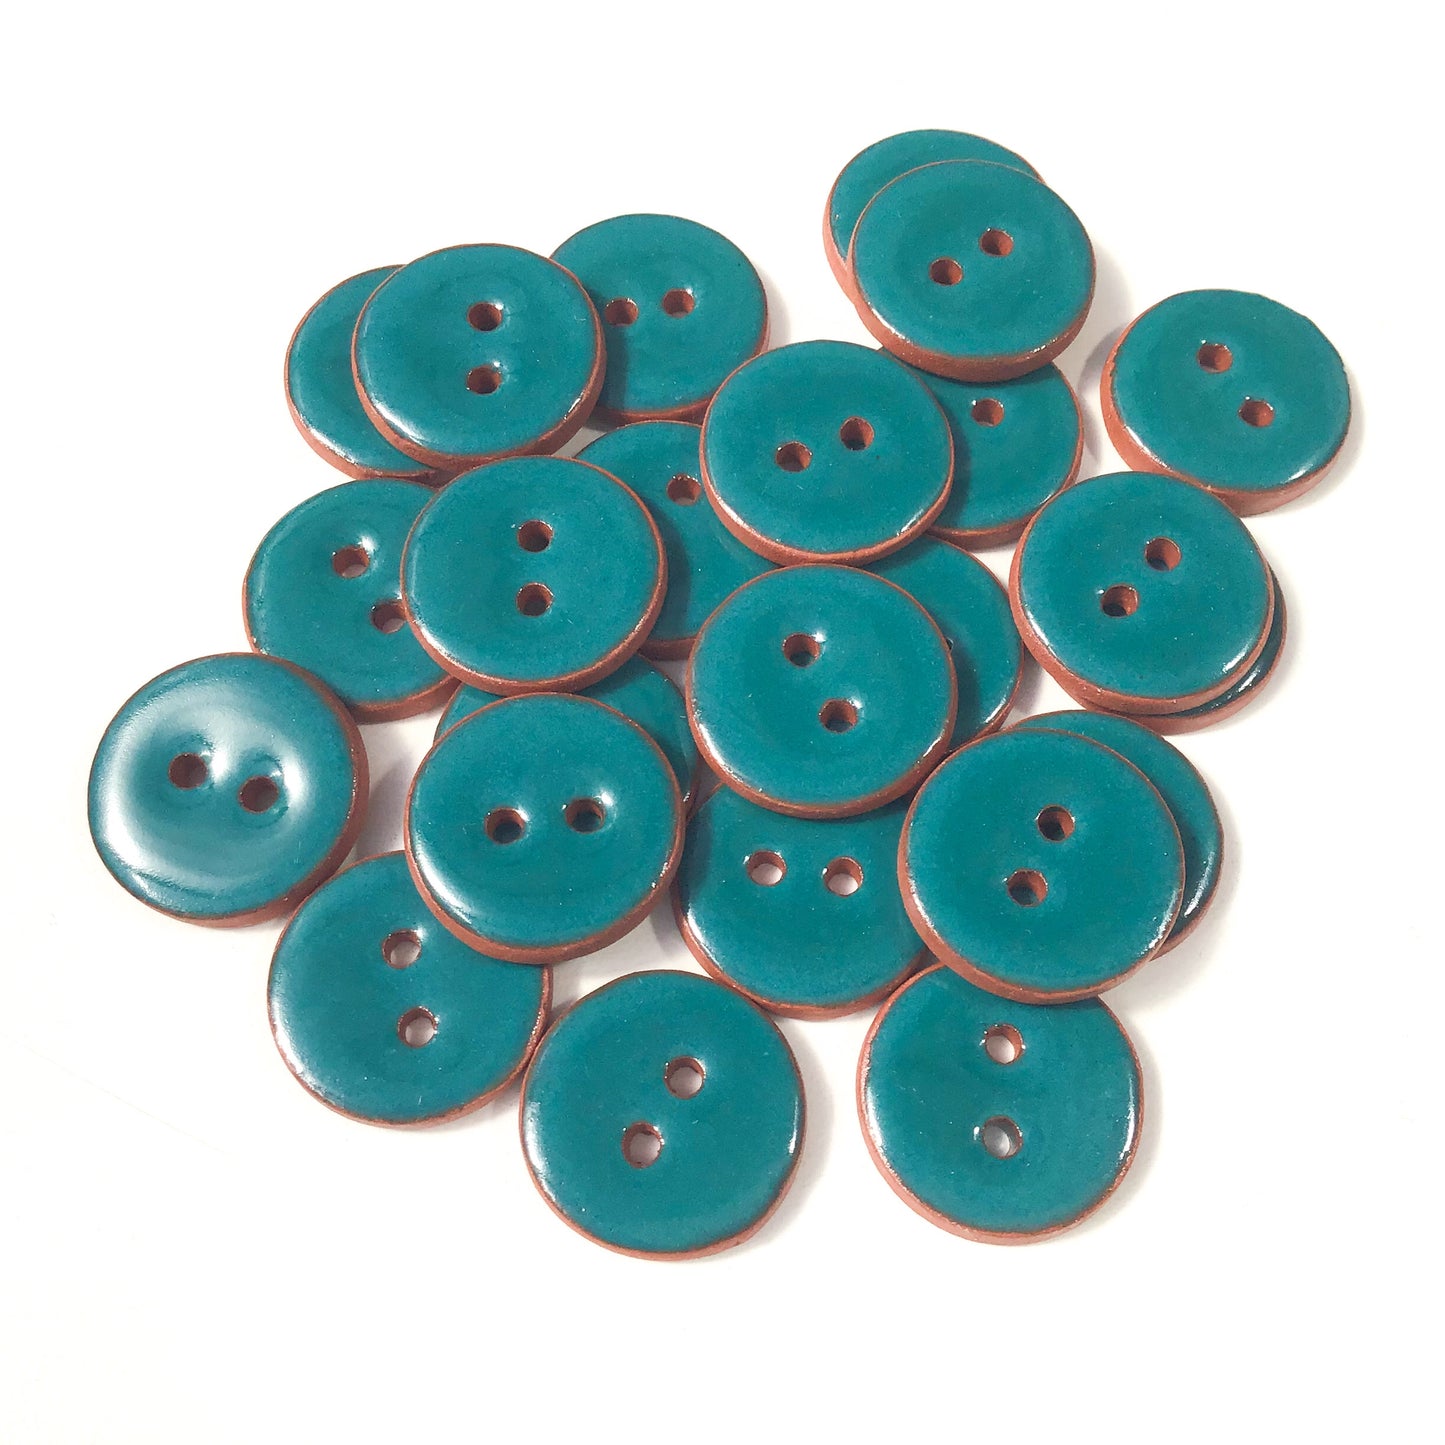 Teal Ceramic Buttons - Teal Pottery Buttons - 3/4"